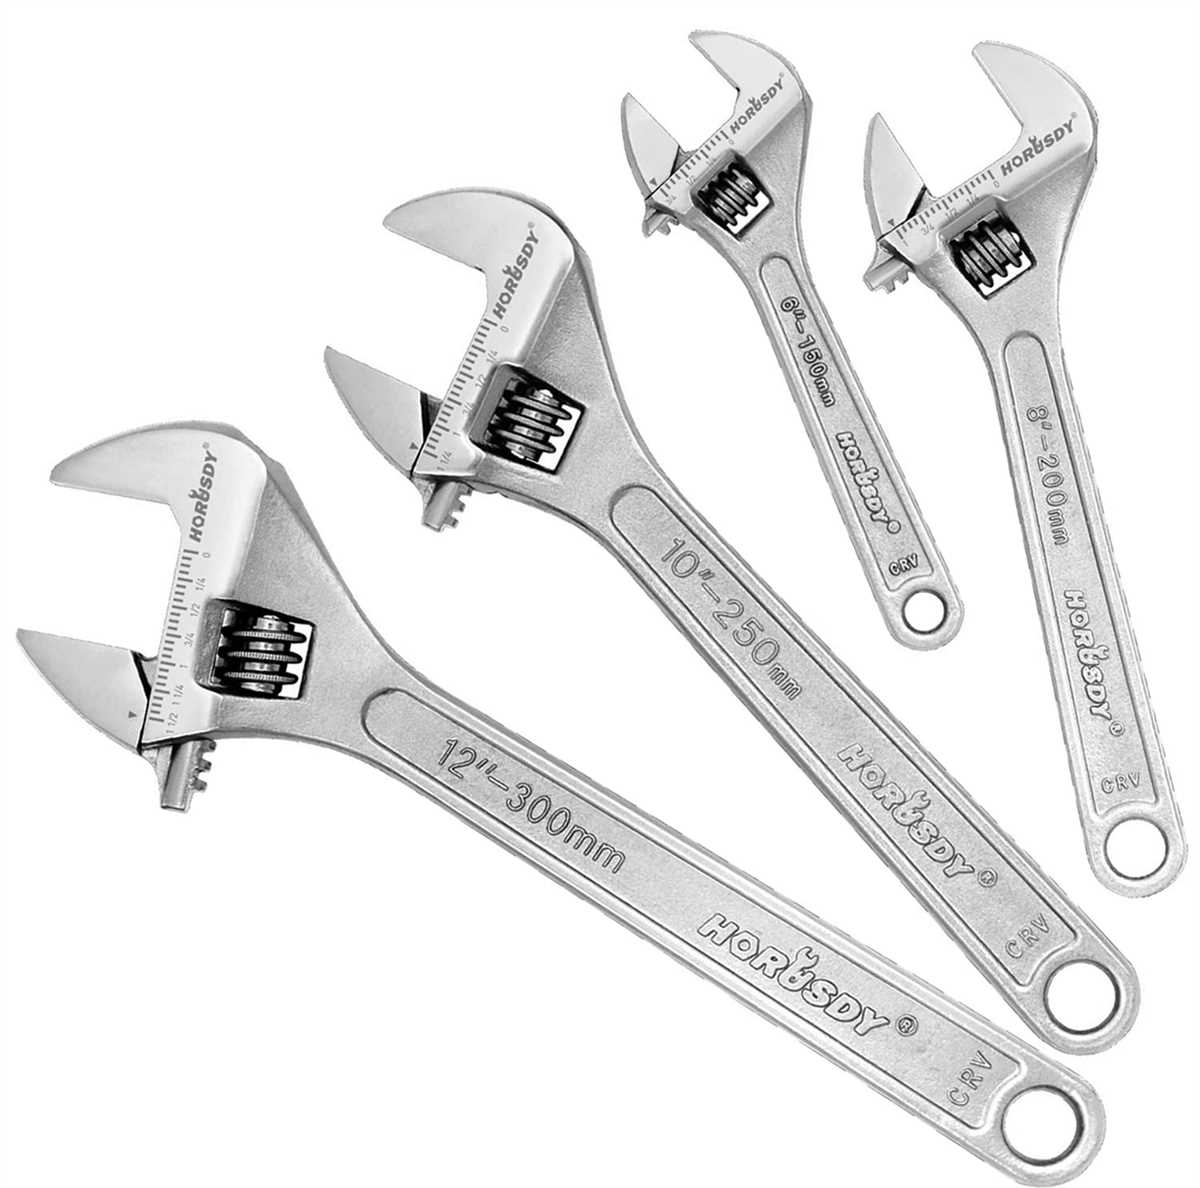 7. Maintain your wrench